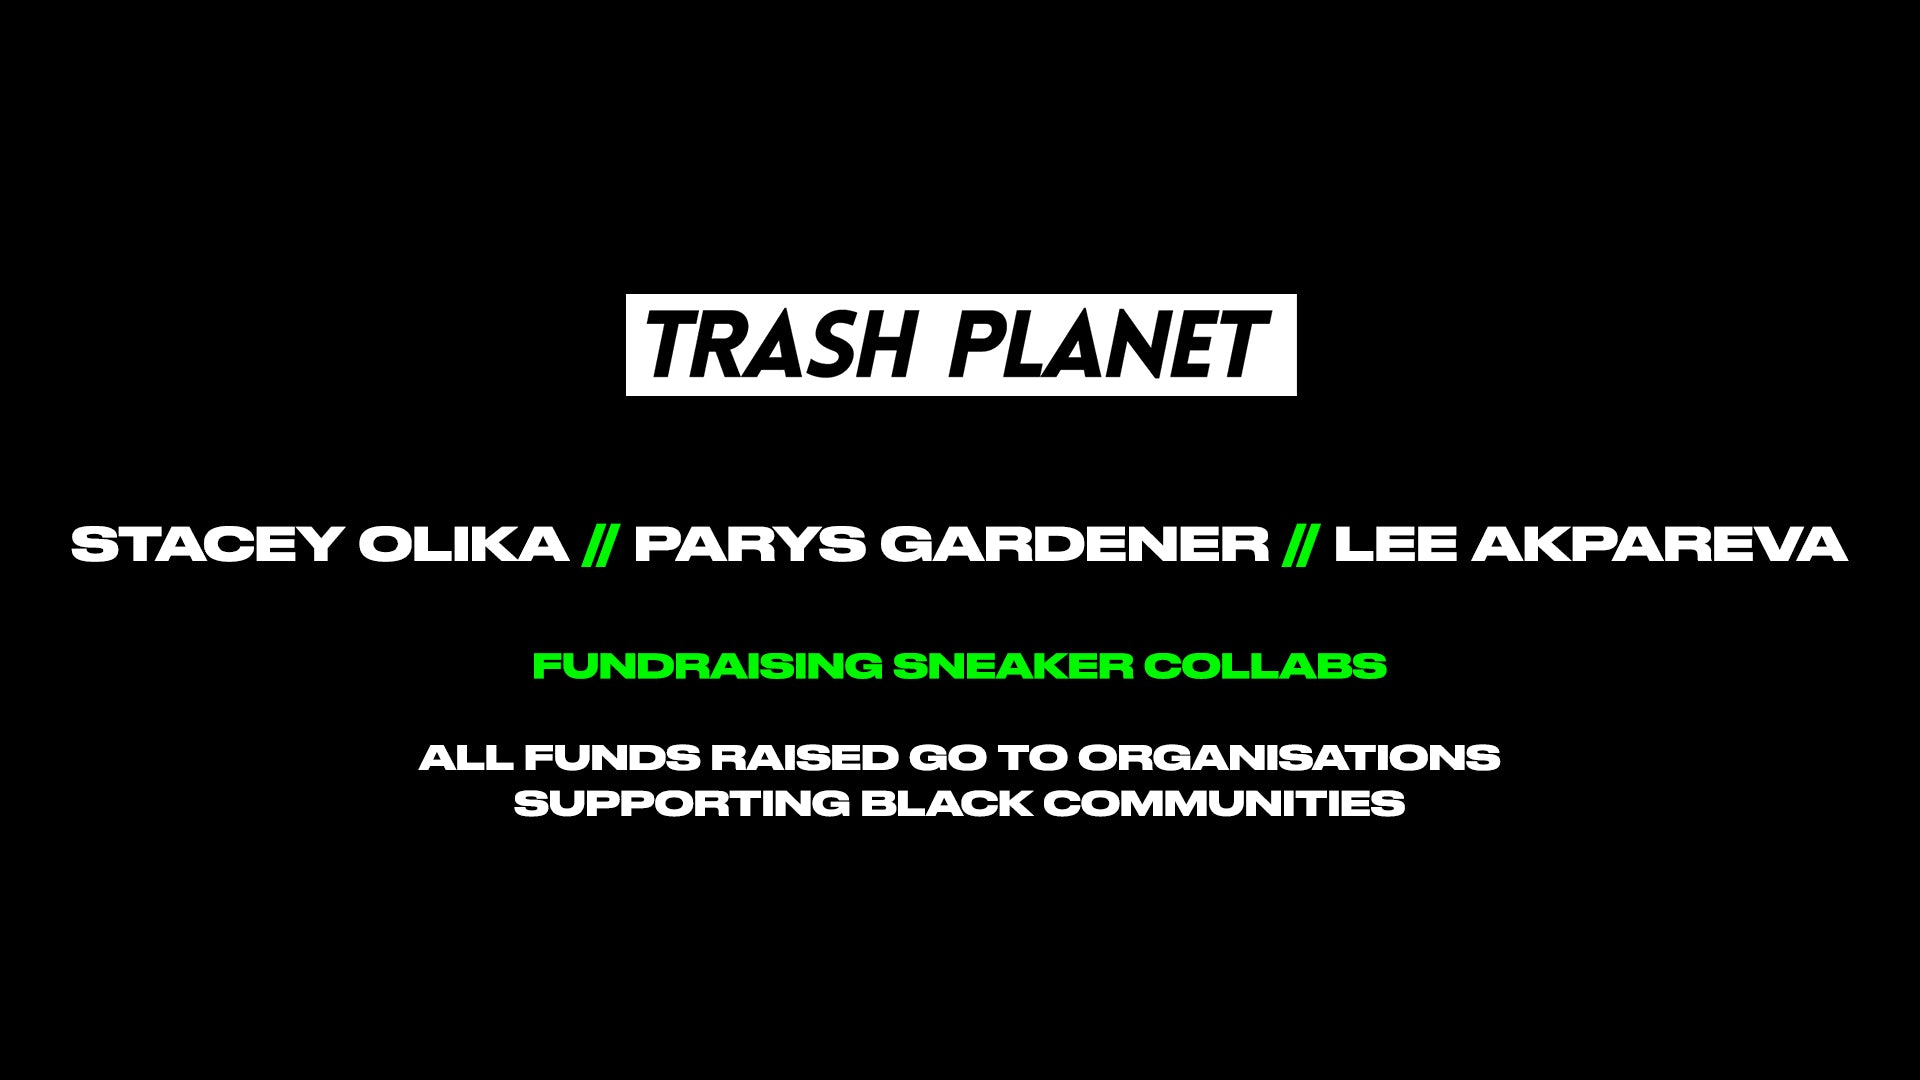 GO Fundraiser: THE LOOK OF TRASH